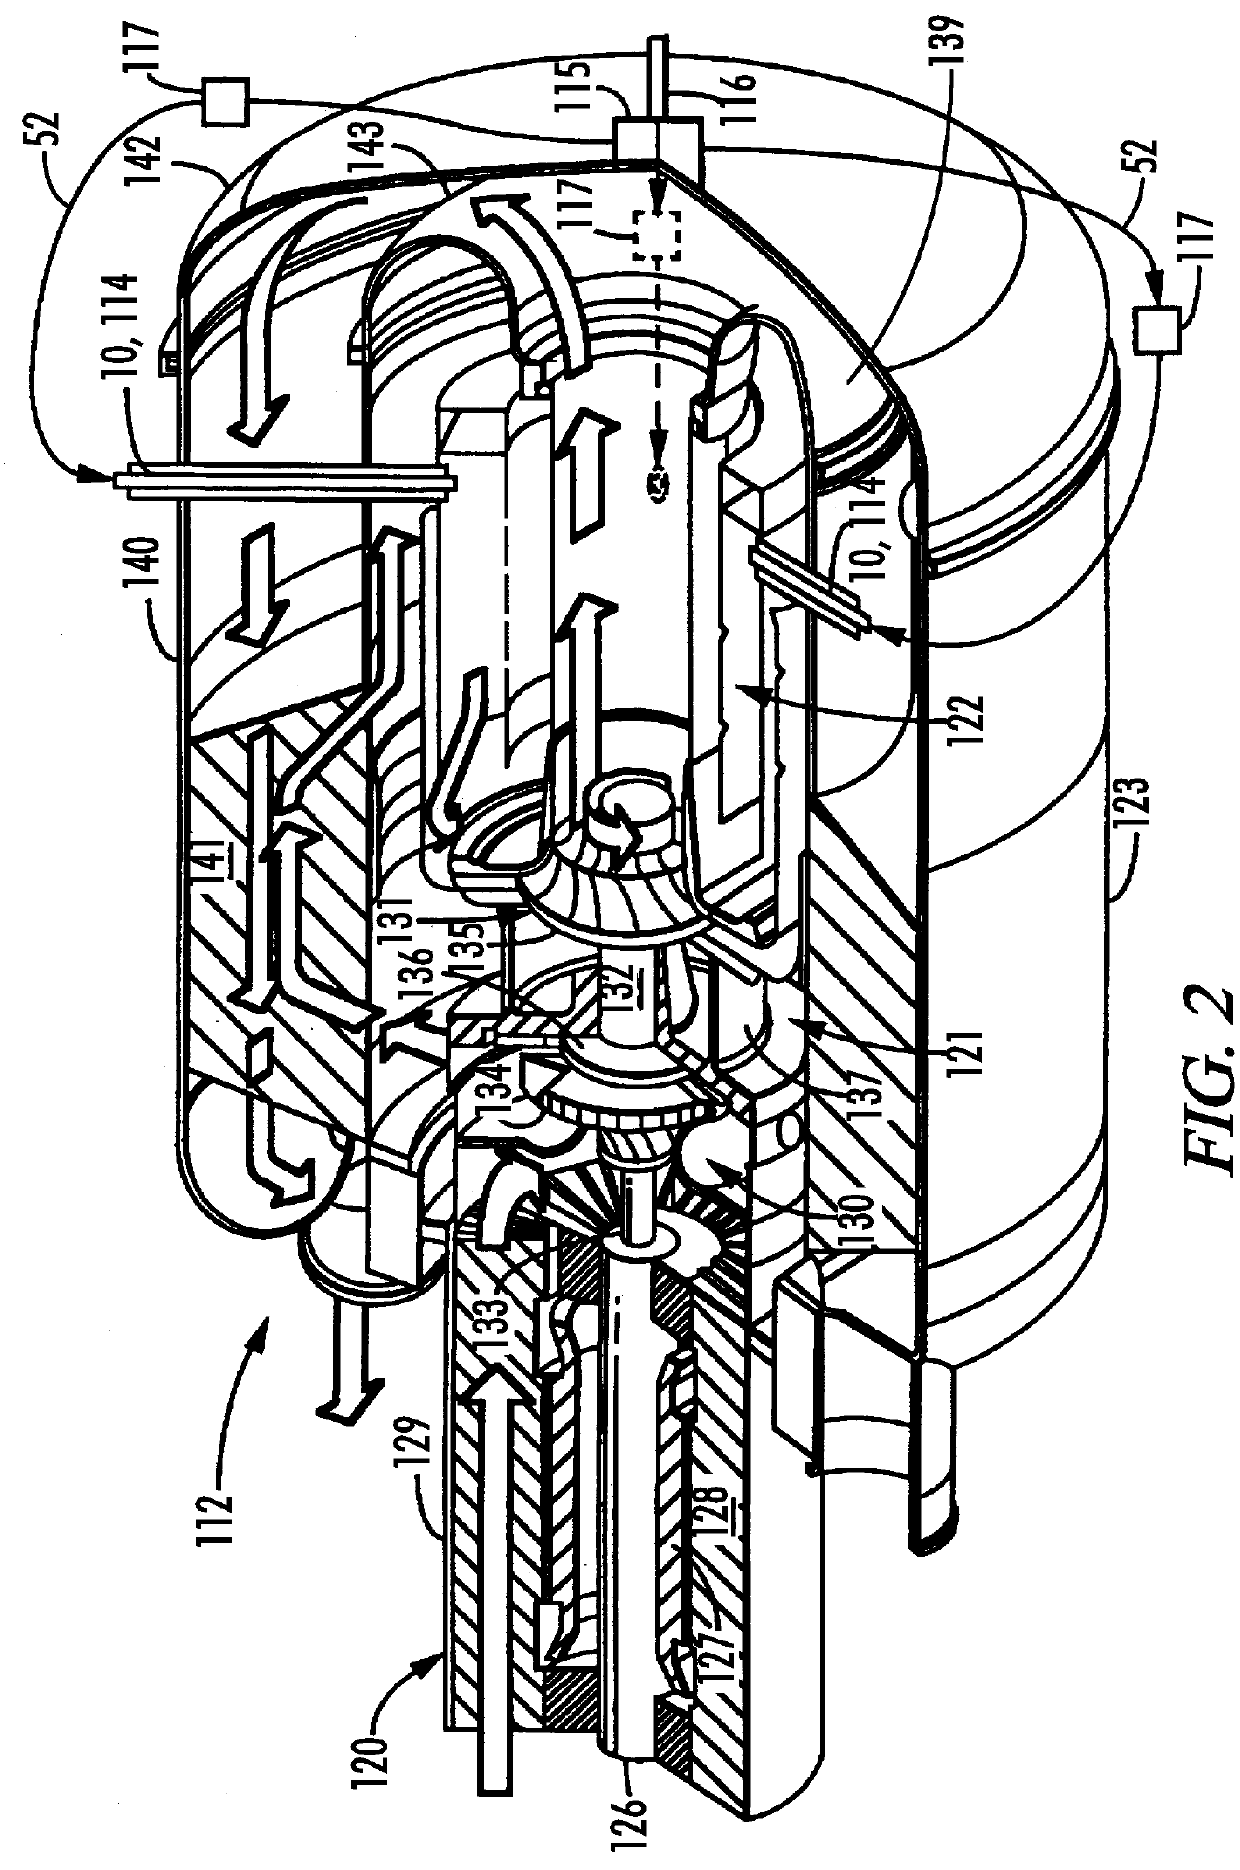 Fuel Injector For High Flame Speed Fuel Combustion